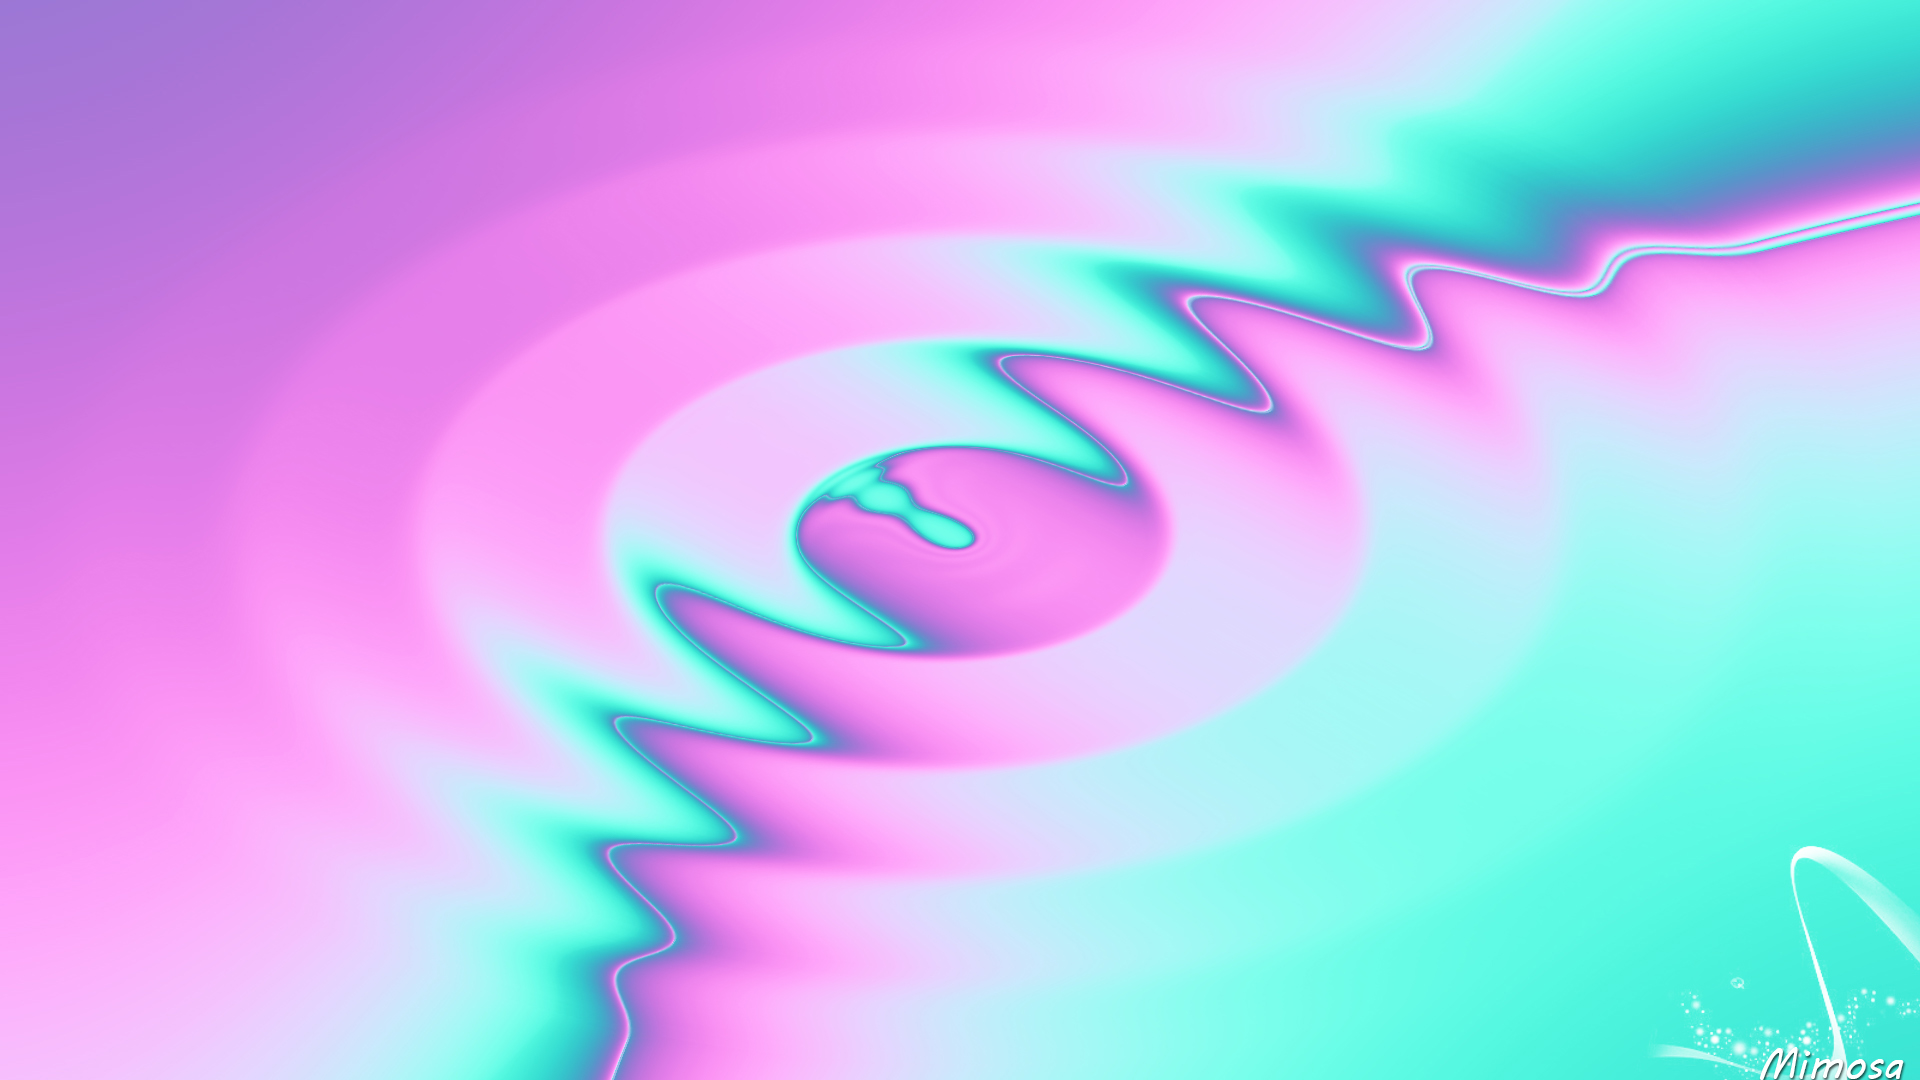 4K, FHD, UHD wave, pastel, colorful, abstract